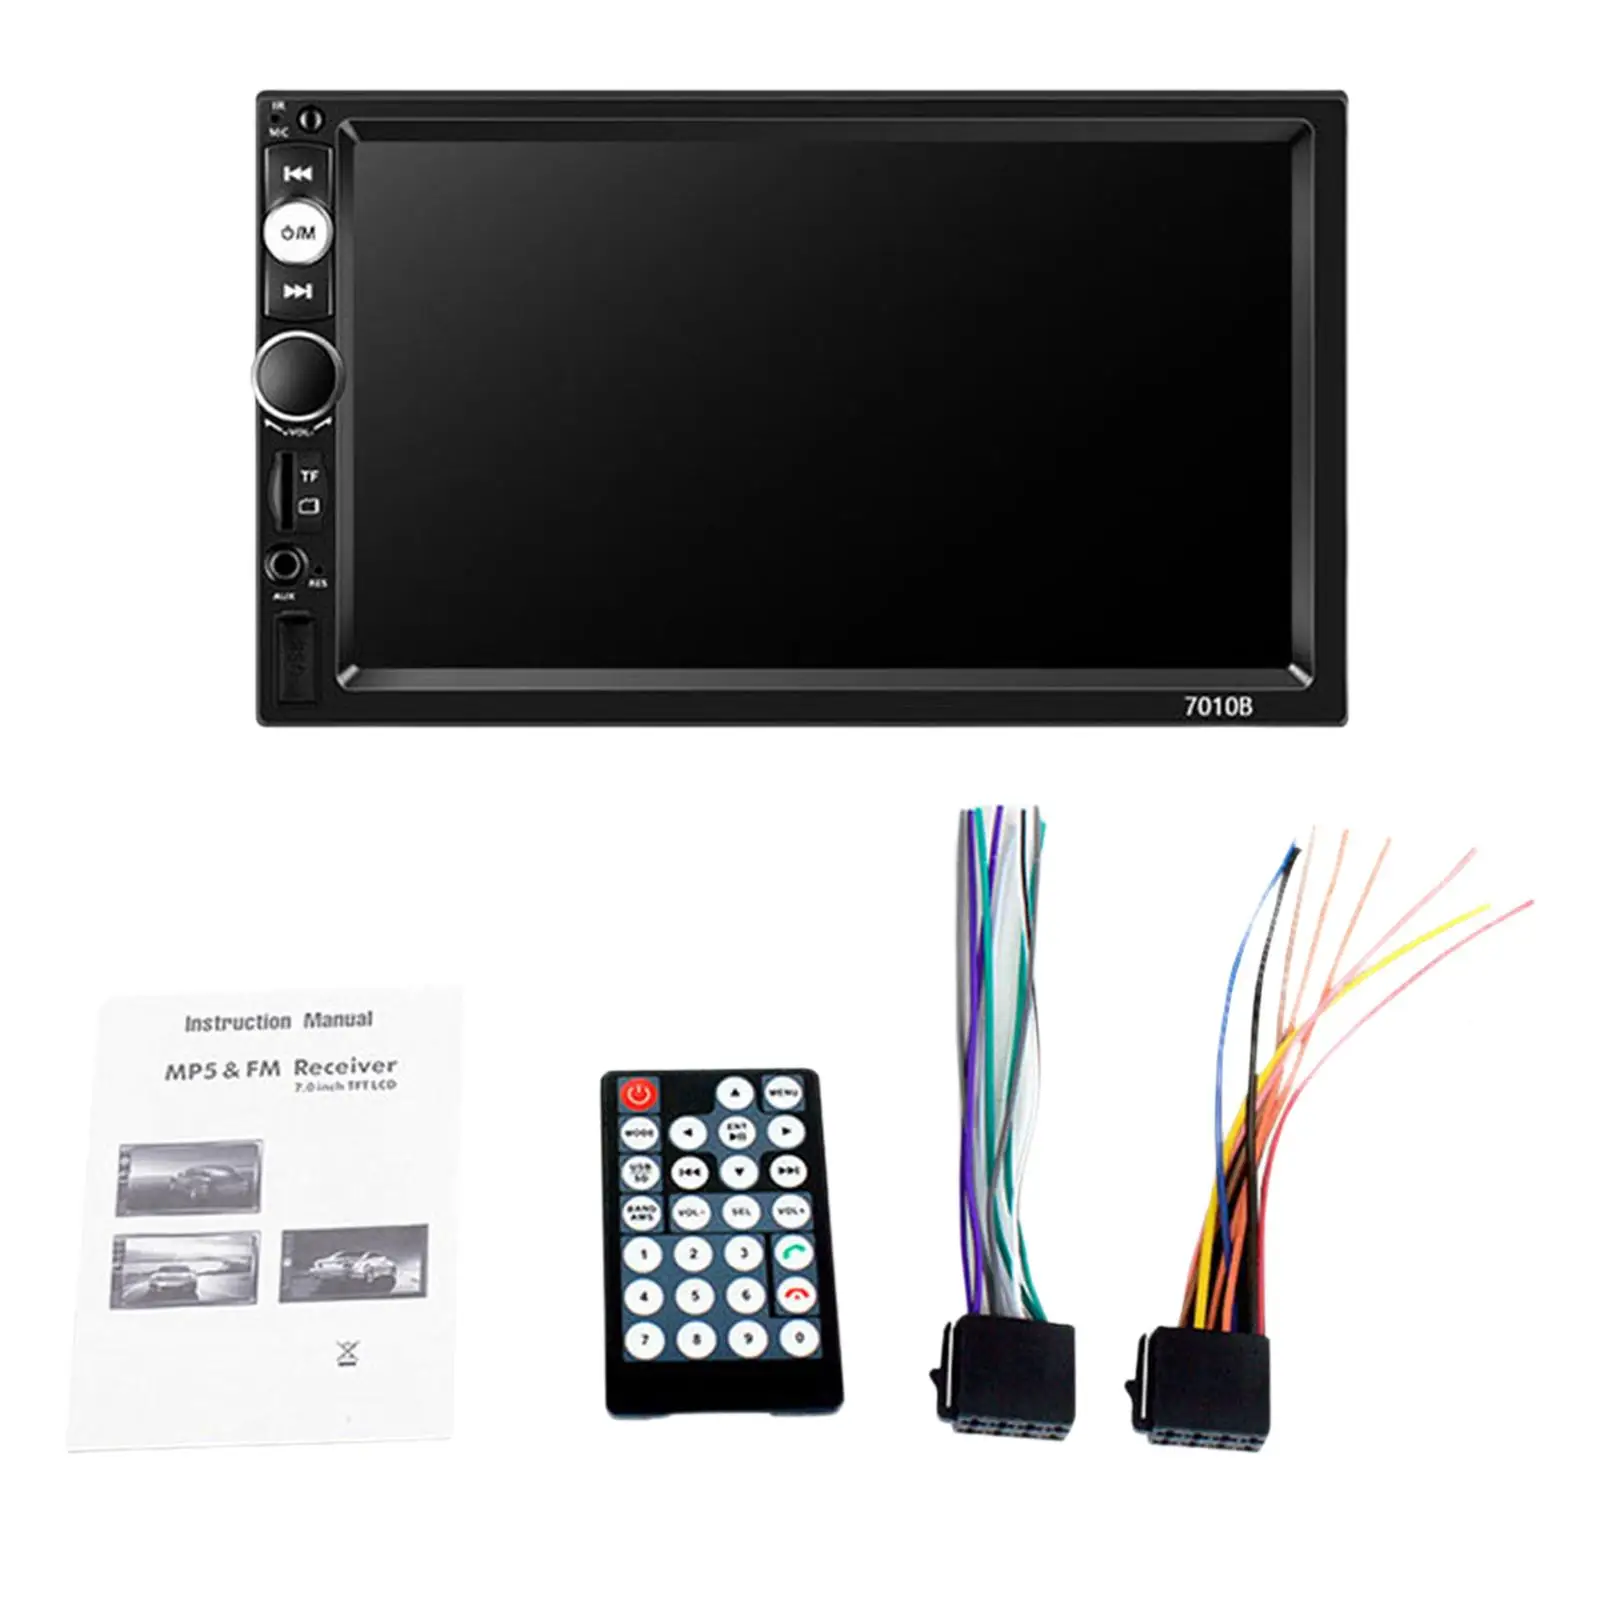 Multimedia Player Stereo Sound 7in LCD Touchscreen for Automotive RV